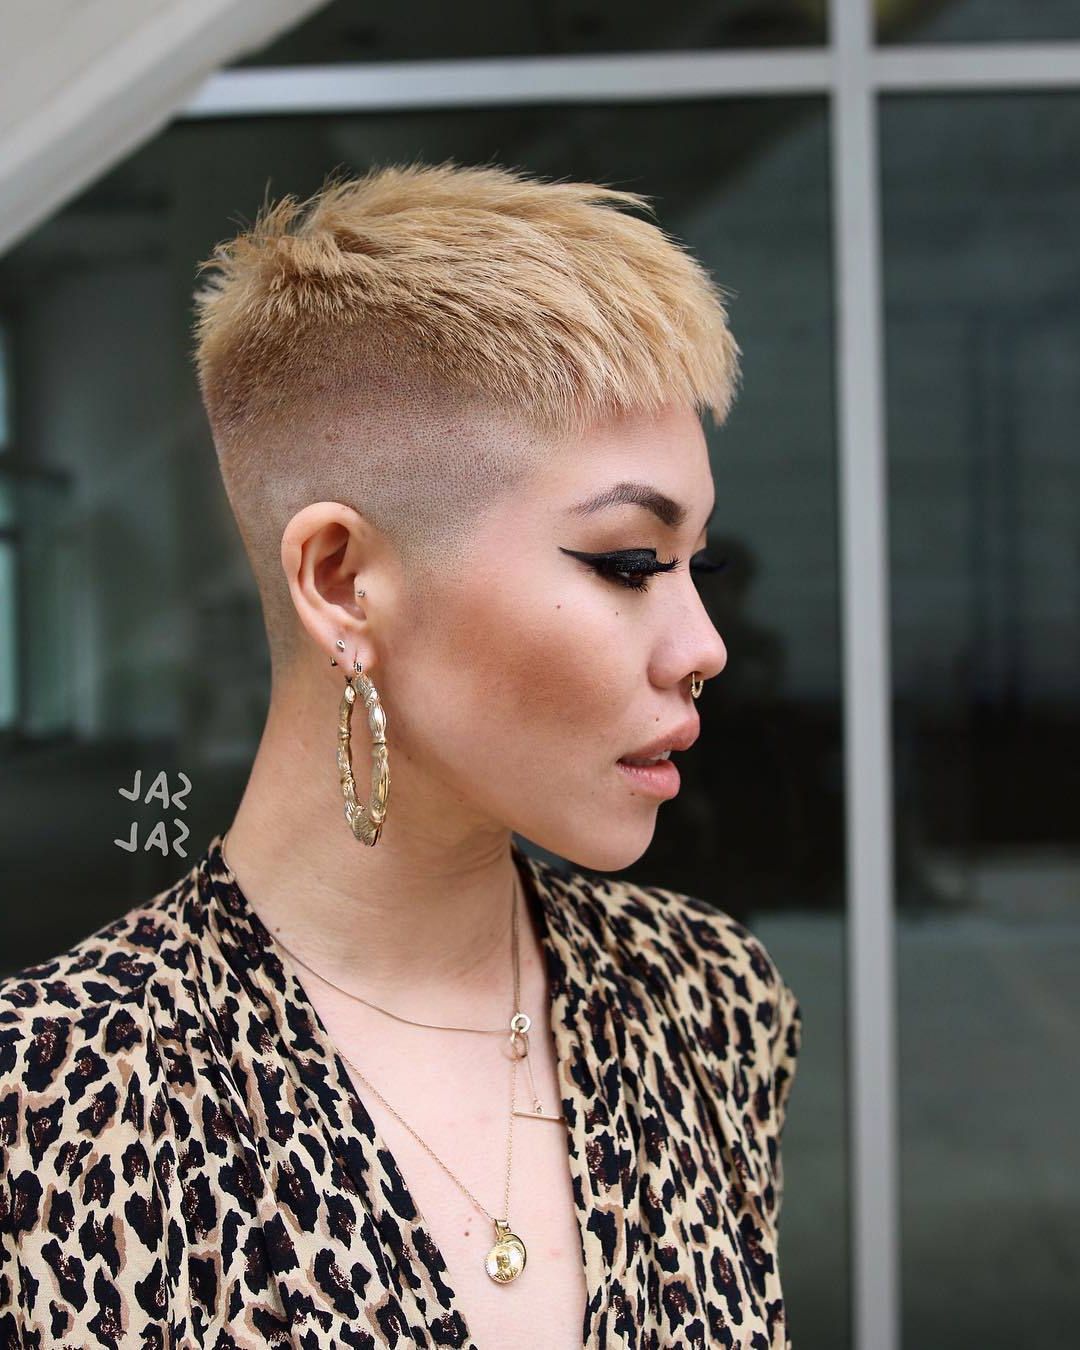 73 Best Pixie Cuts For 2022 | The Top Short And Long Pixie Hairstyles With Regard To Side Parted Pixie Hairstyles With An Undercut (View 20 of 20)